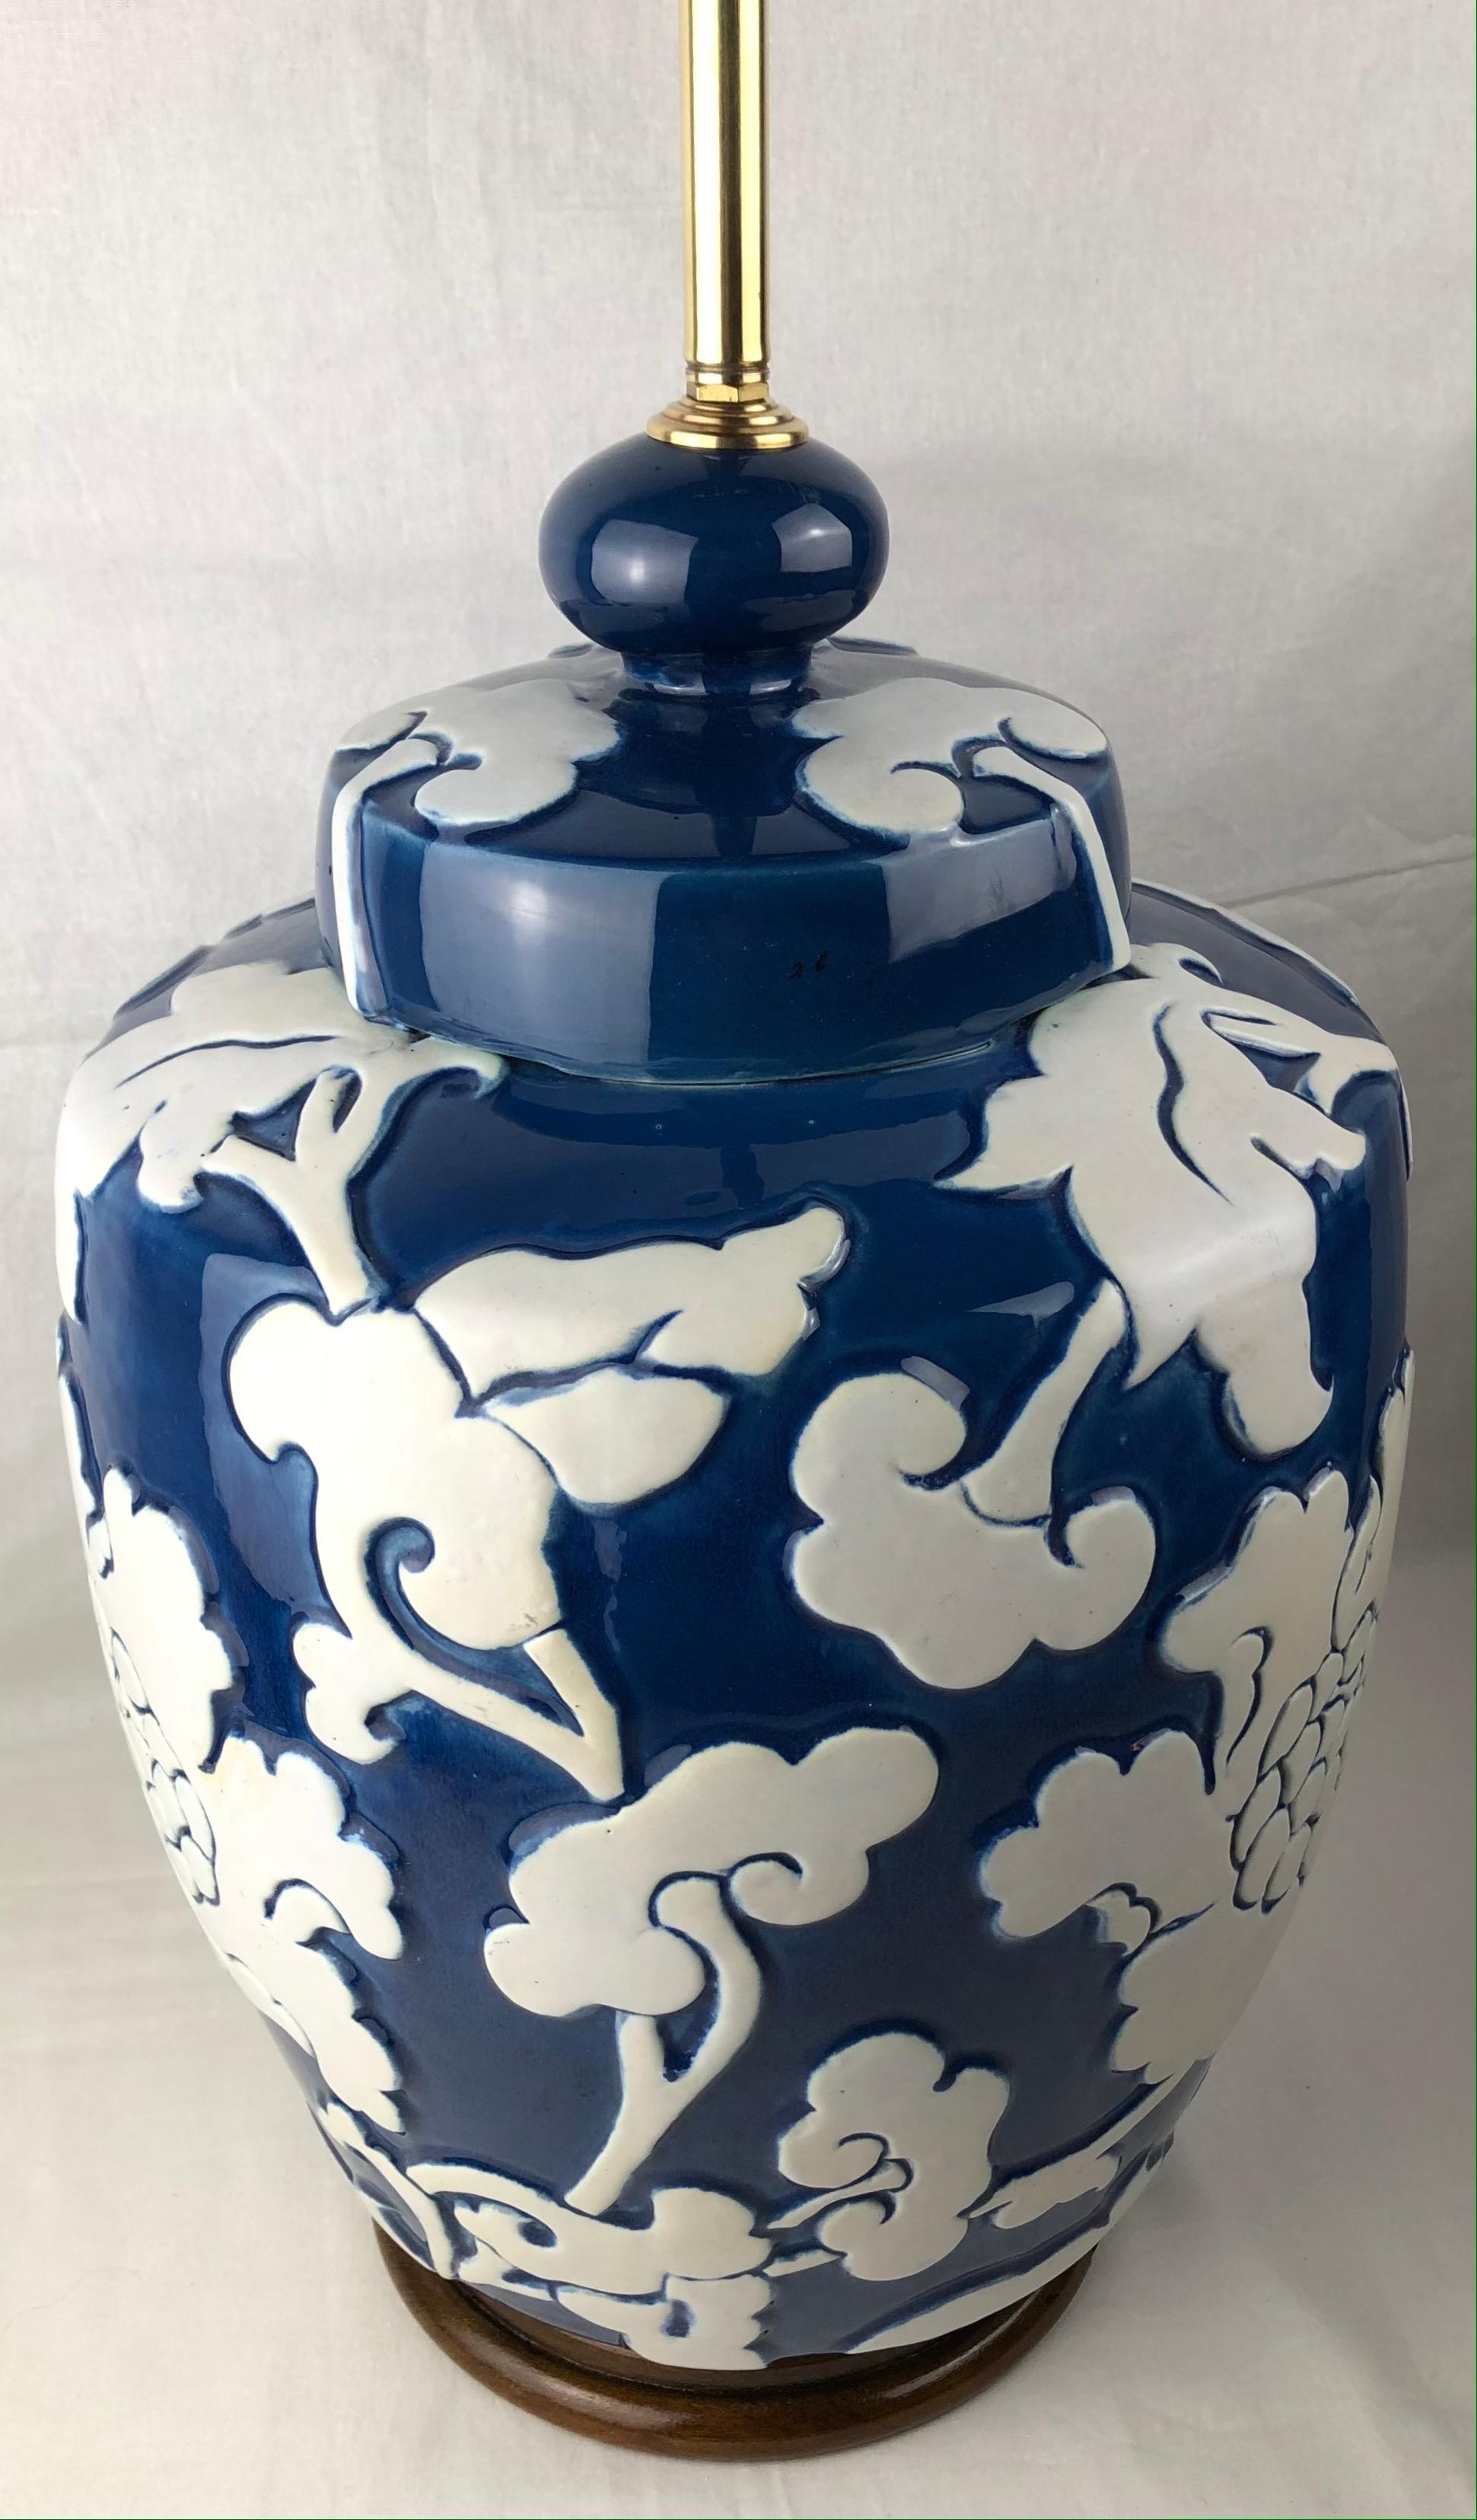 A circa 1920s French porcelain table lamp with floral motif on blue-glaze and a walnut wood base. High relief motifs. The provenance of this beautiful lamp is a prominent estate in St.-Remy-de-Provence. 

Measurements:
Height of body 38 1/2